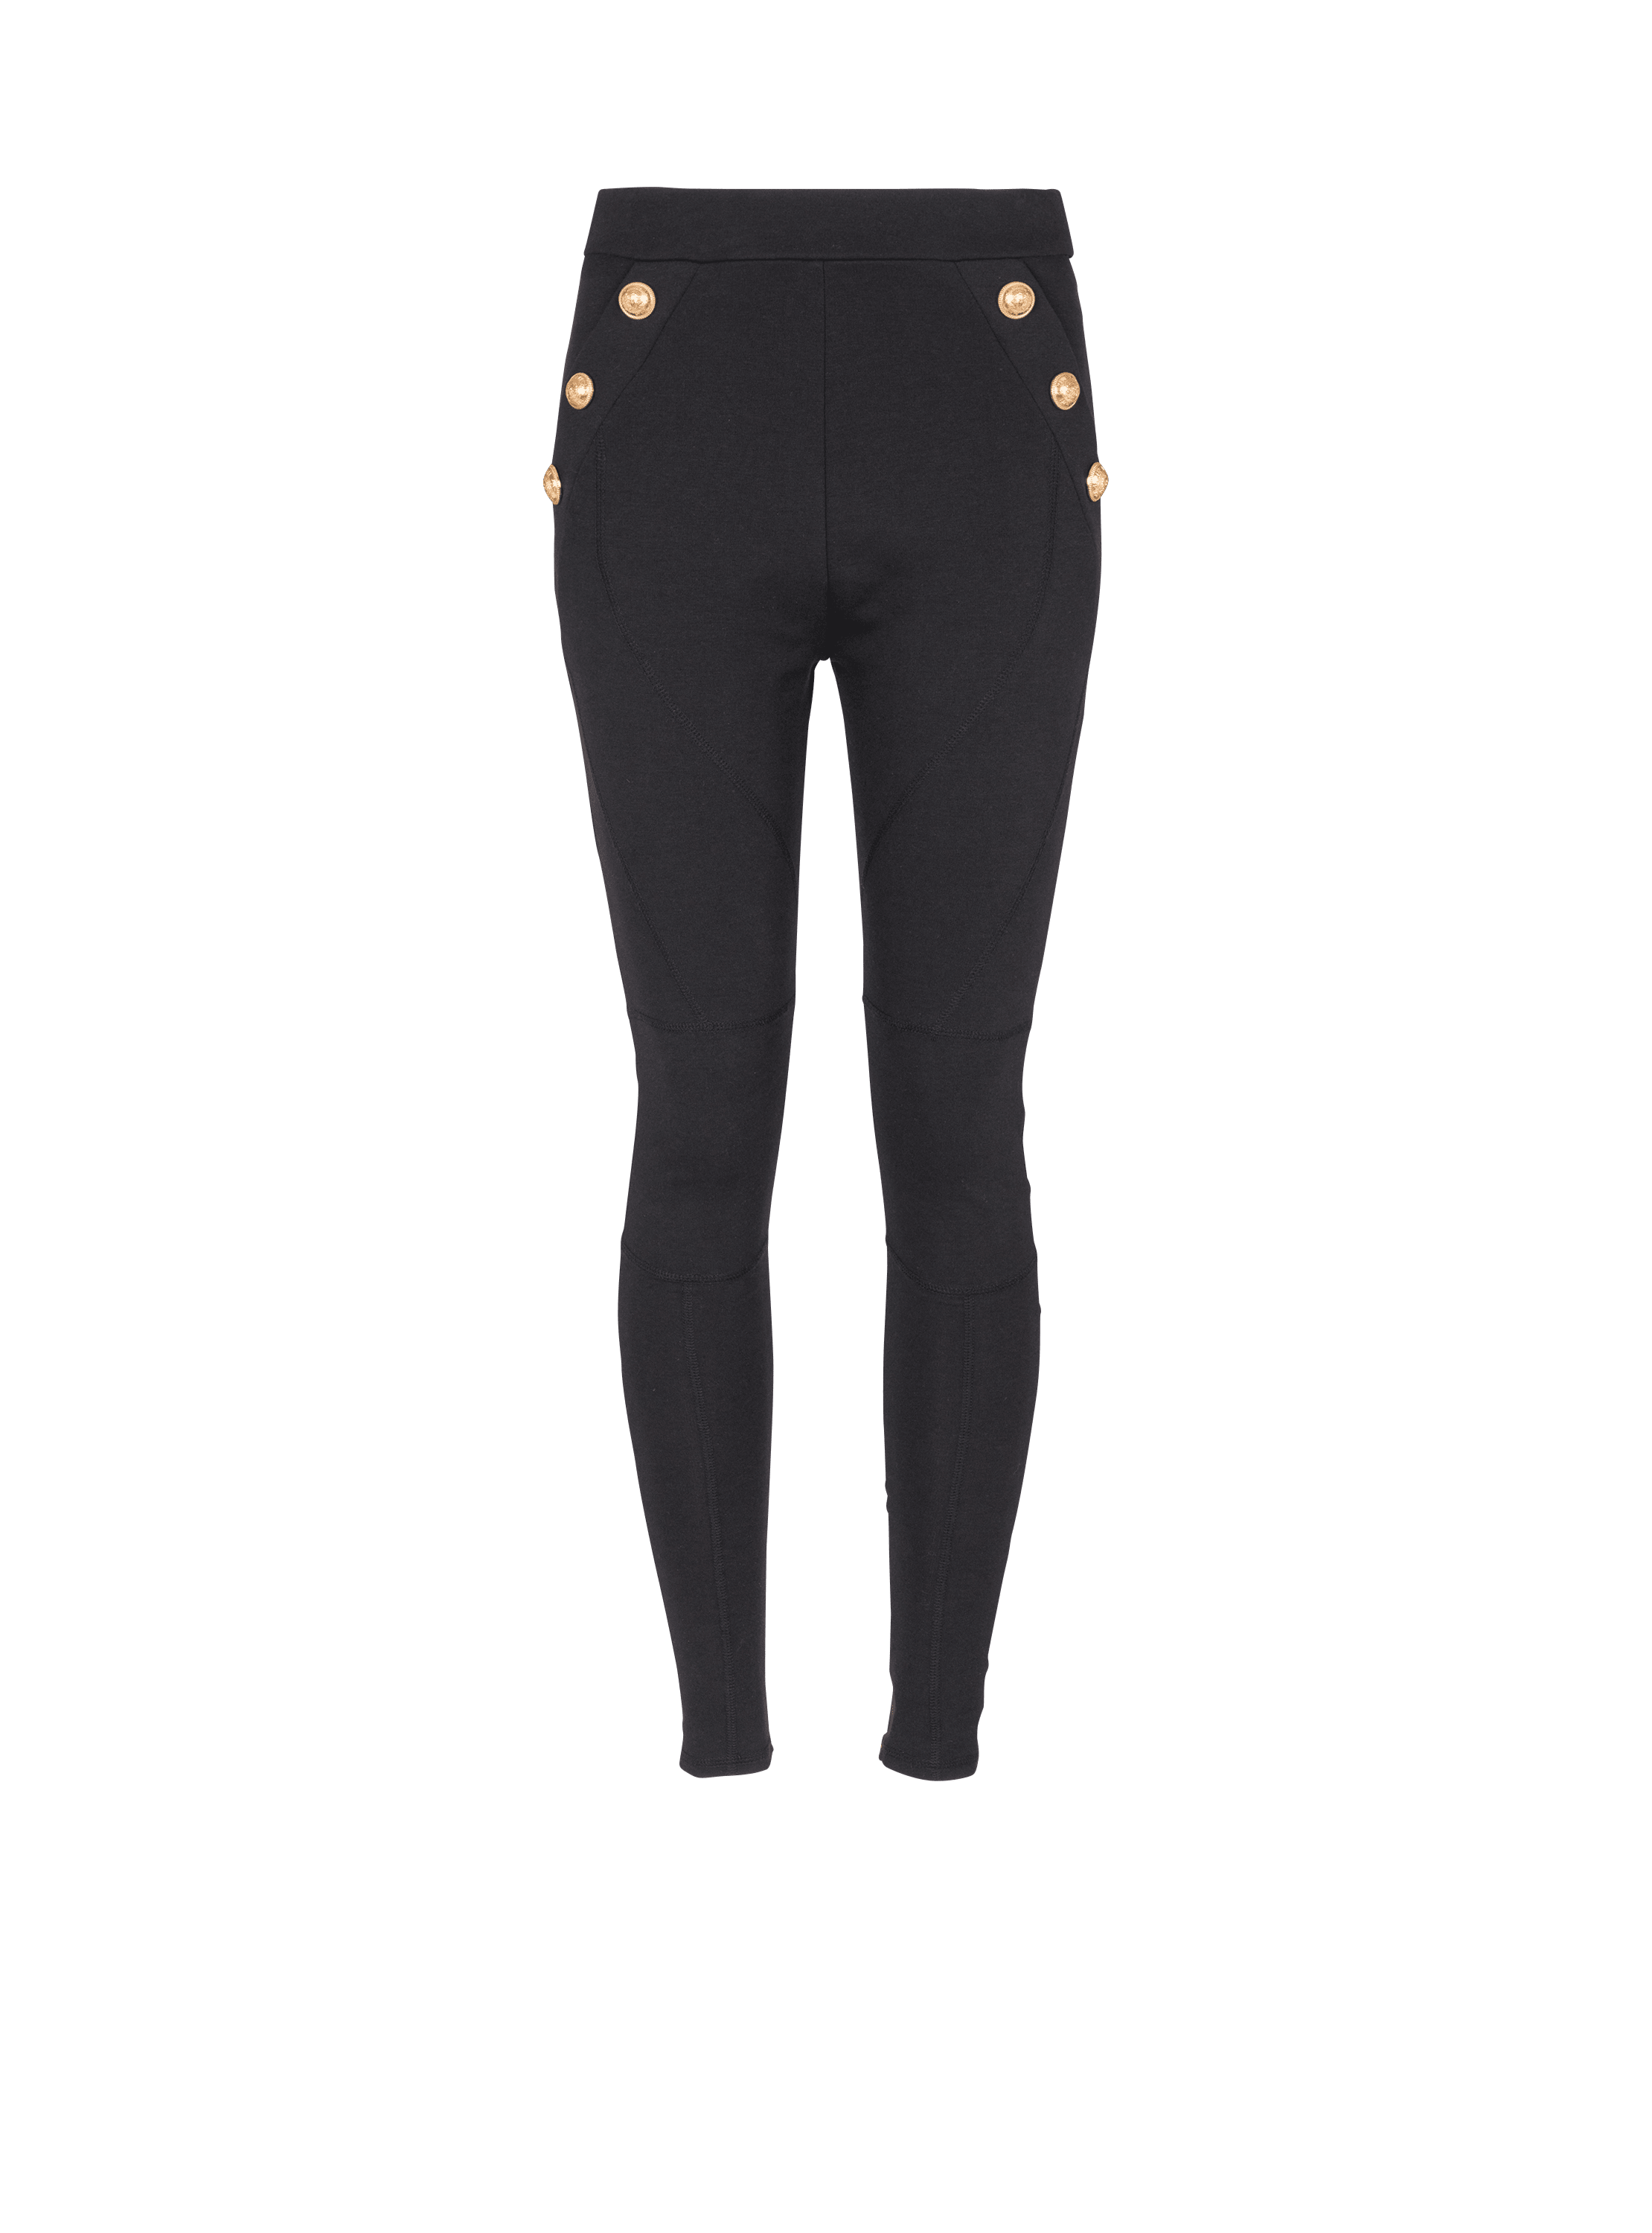 Cheap Brothers Knit Garments Black Adults Cotton Leggings With